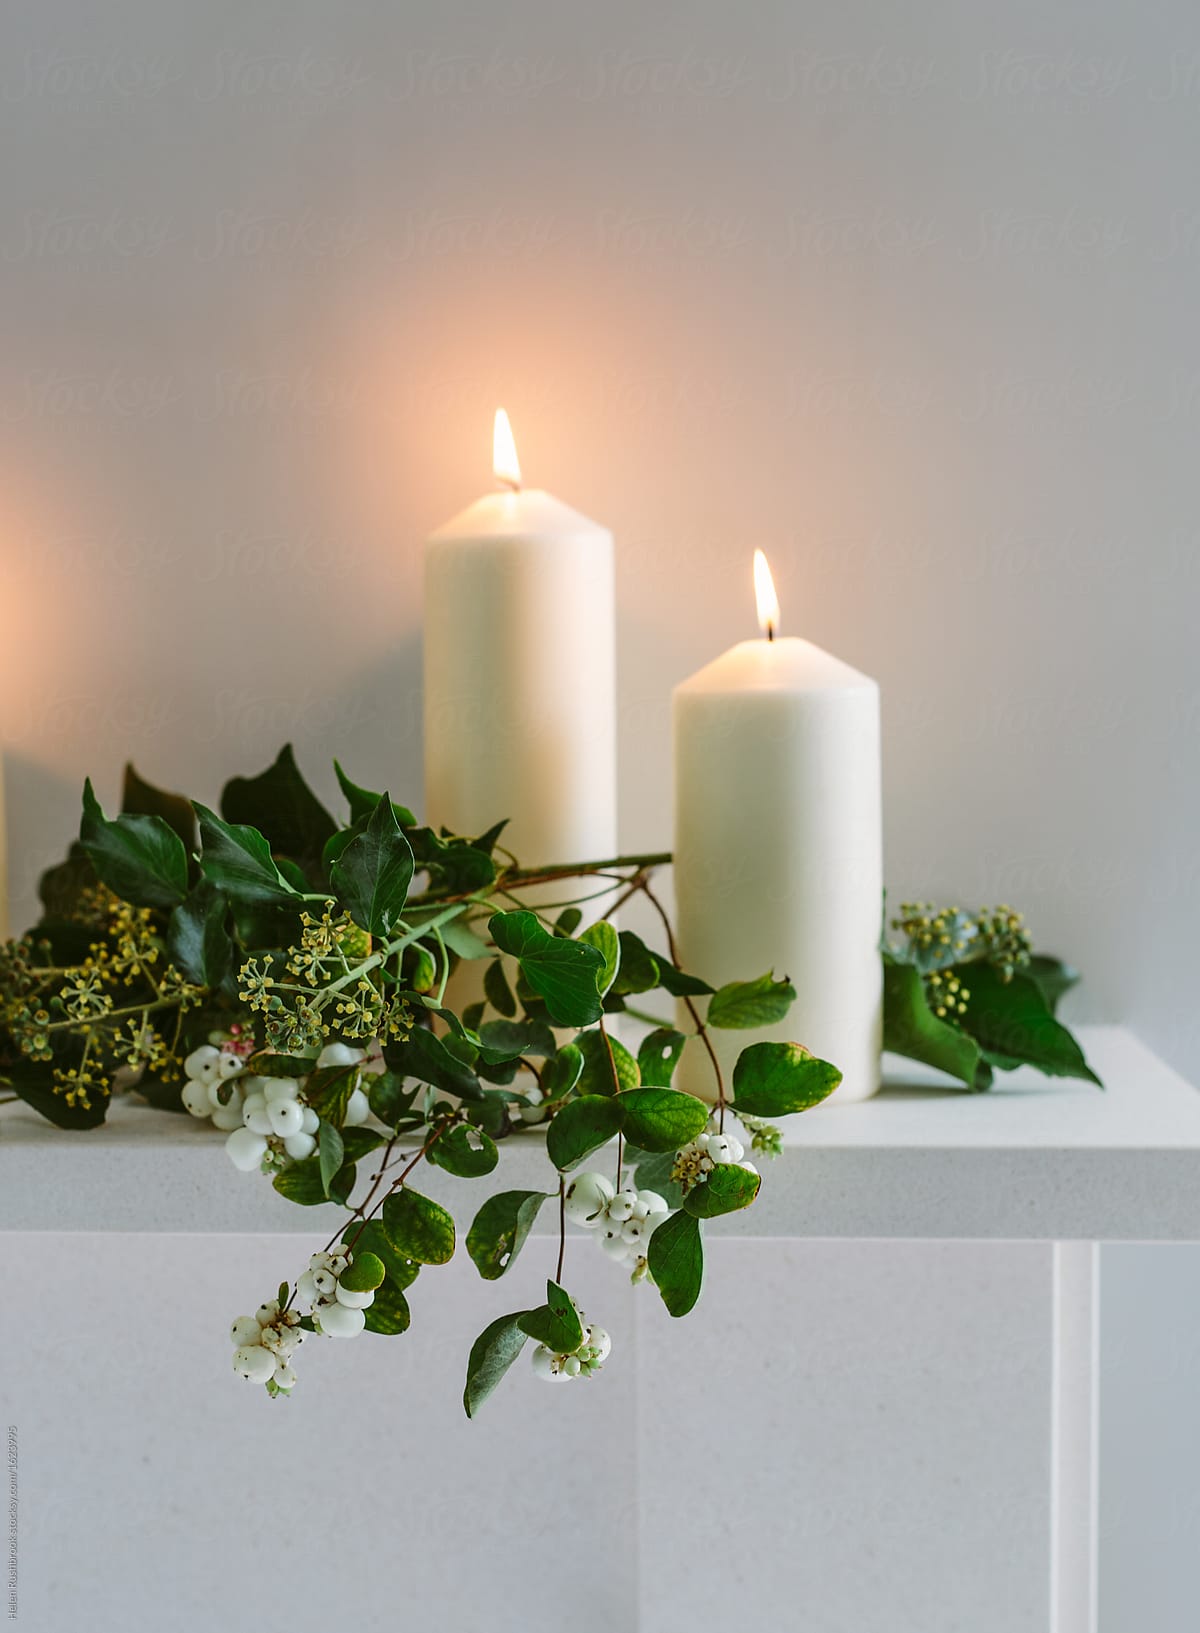 Ivy and pillar candles on a mantlepiece